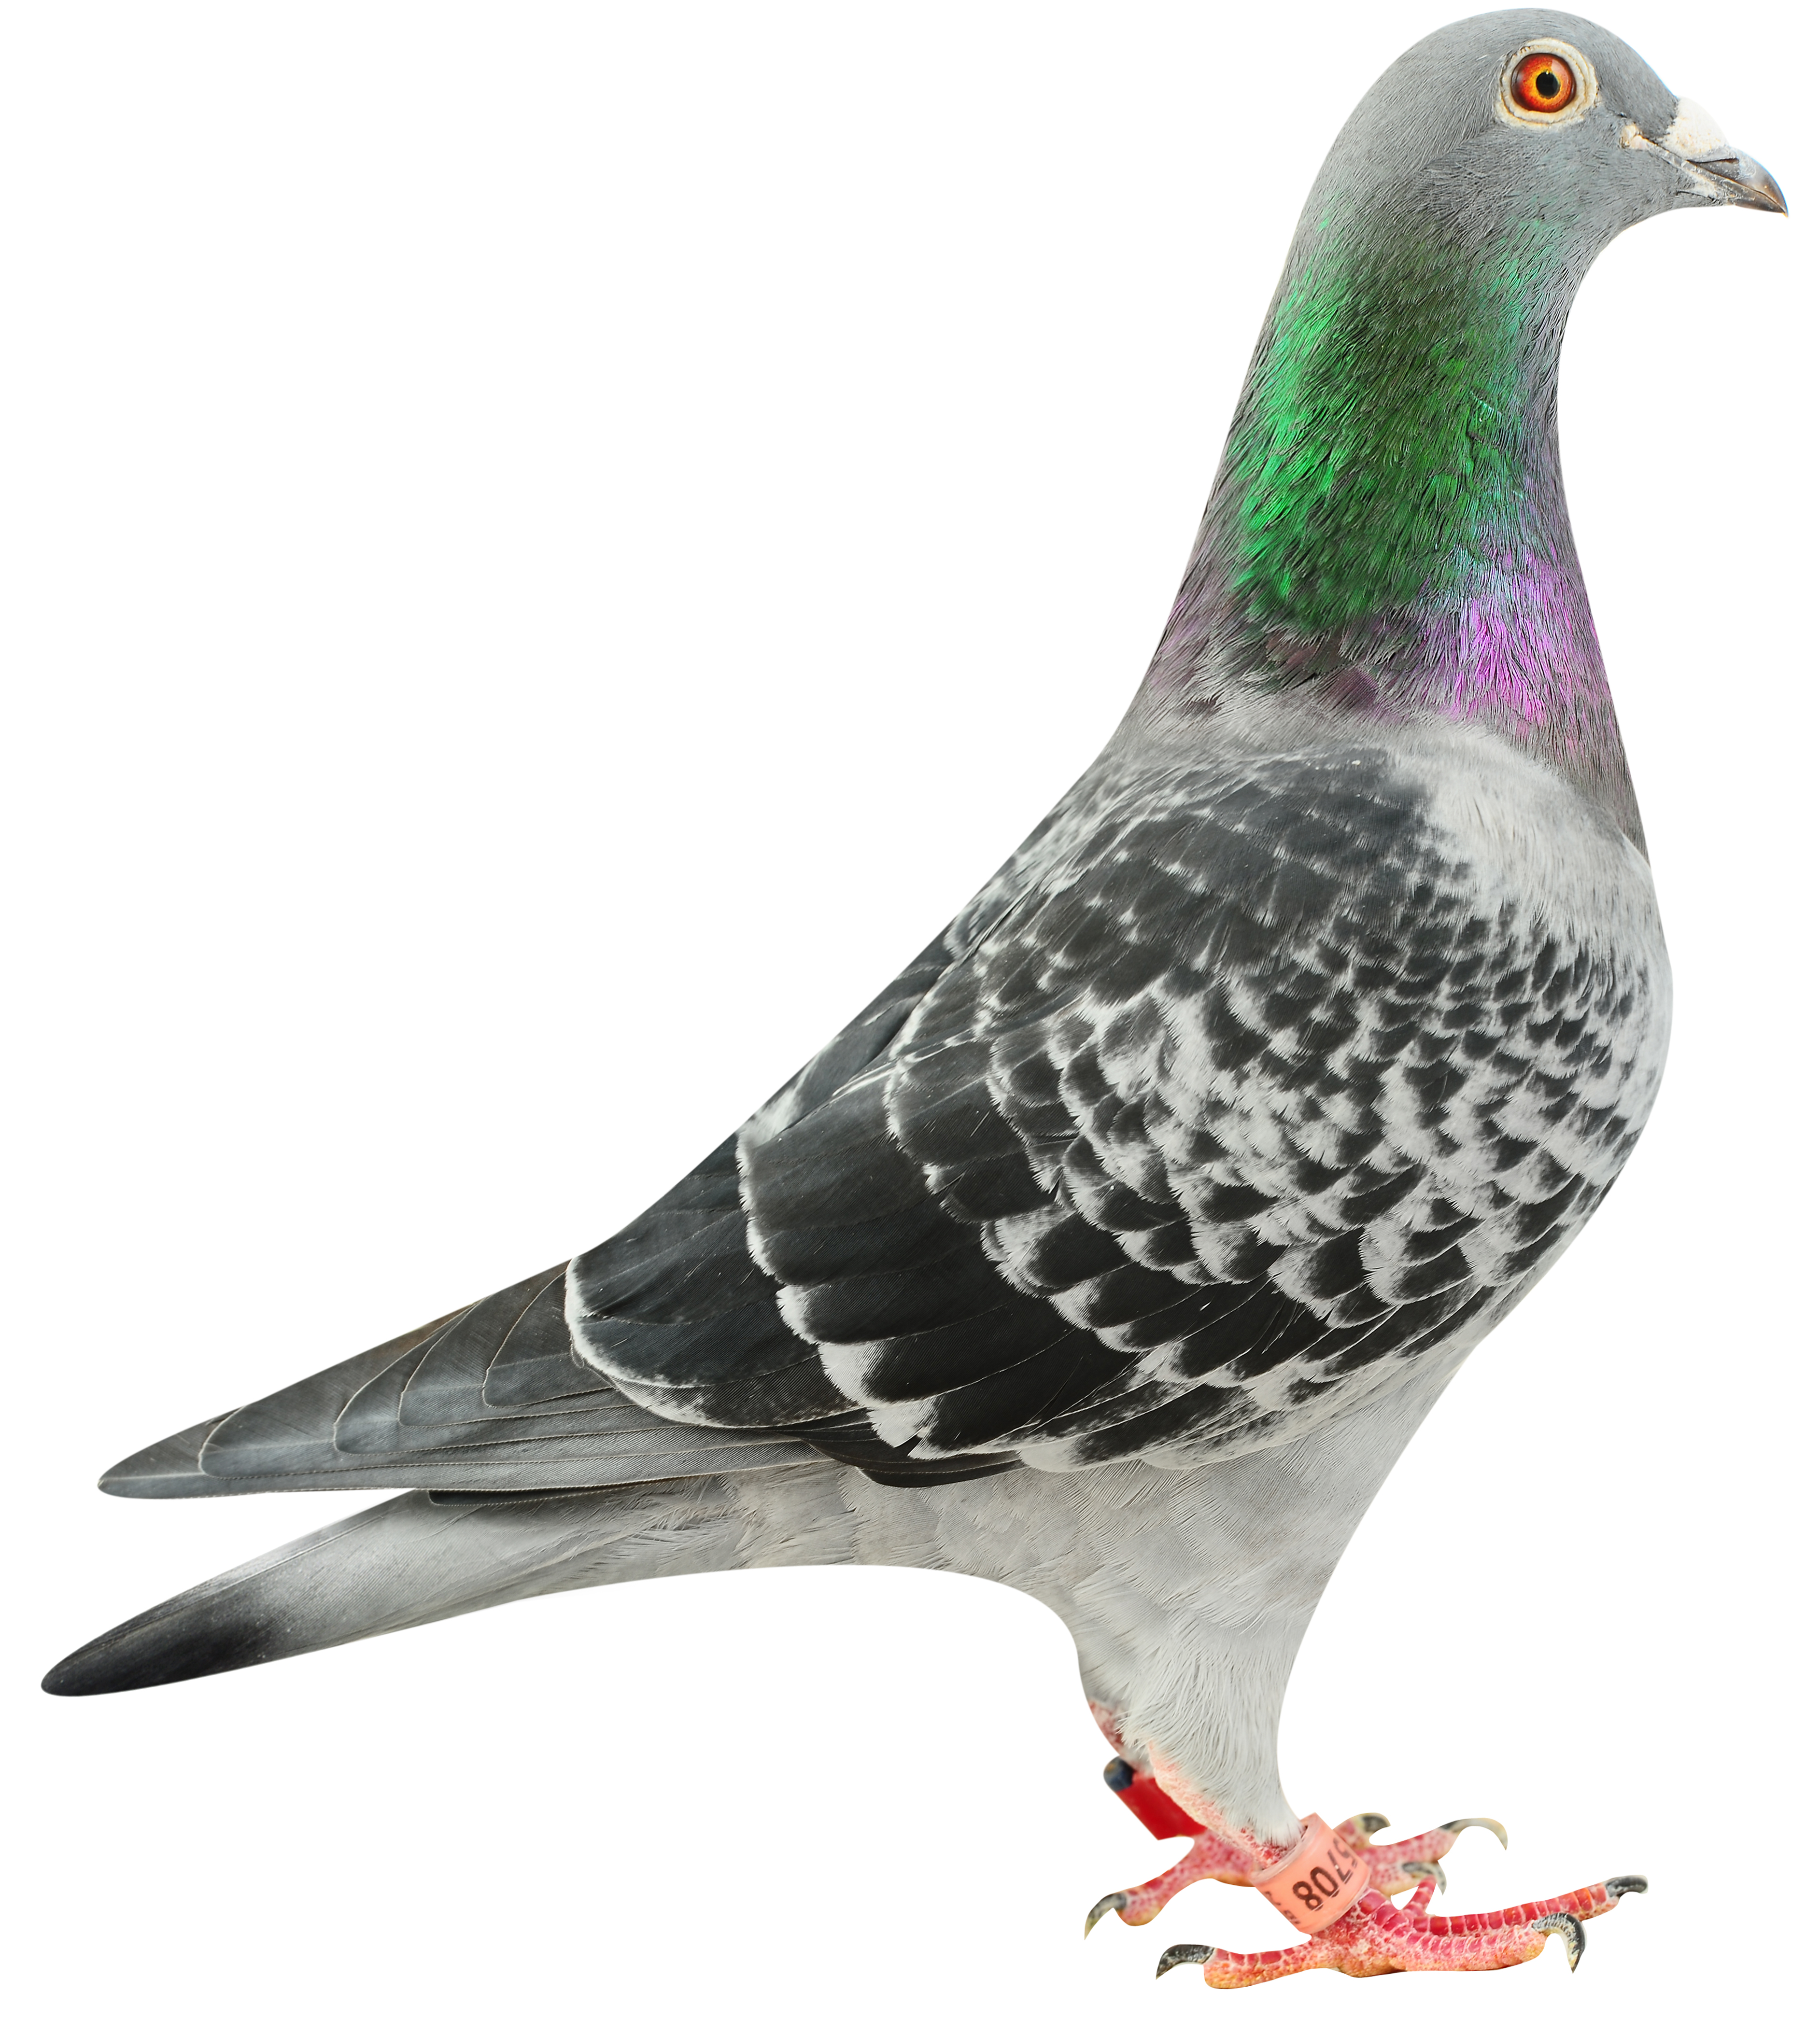 1e As Pigeon National du Grand Fond 2014 Yearling vient oussi a TBL!